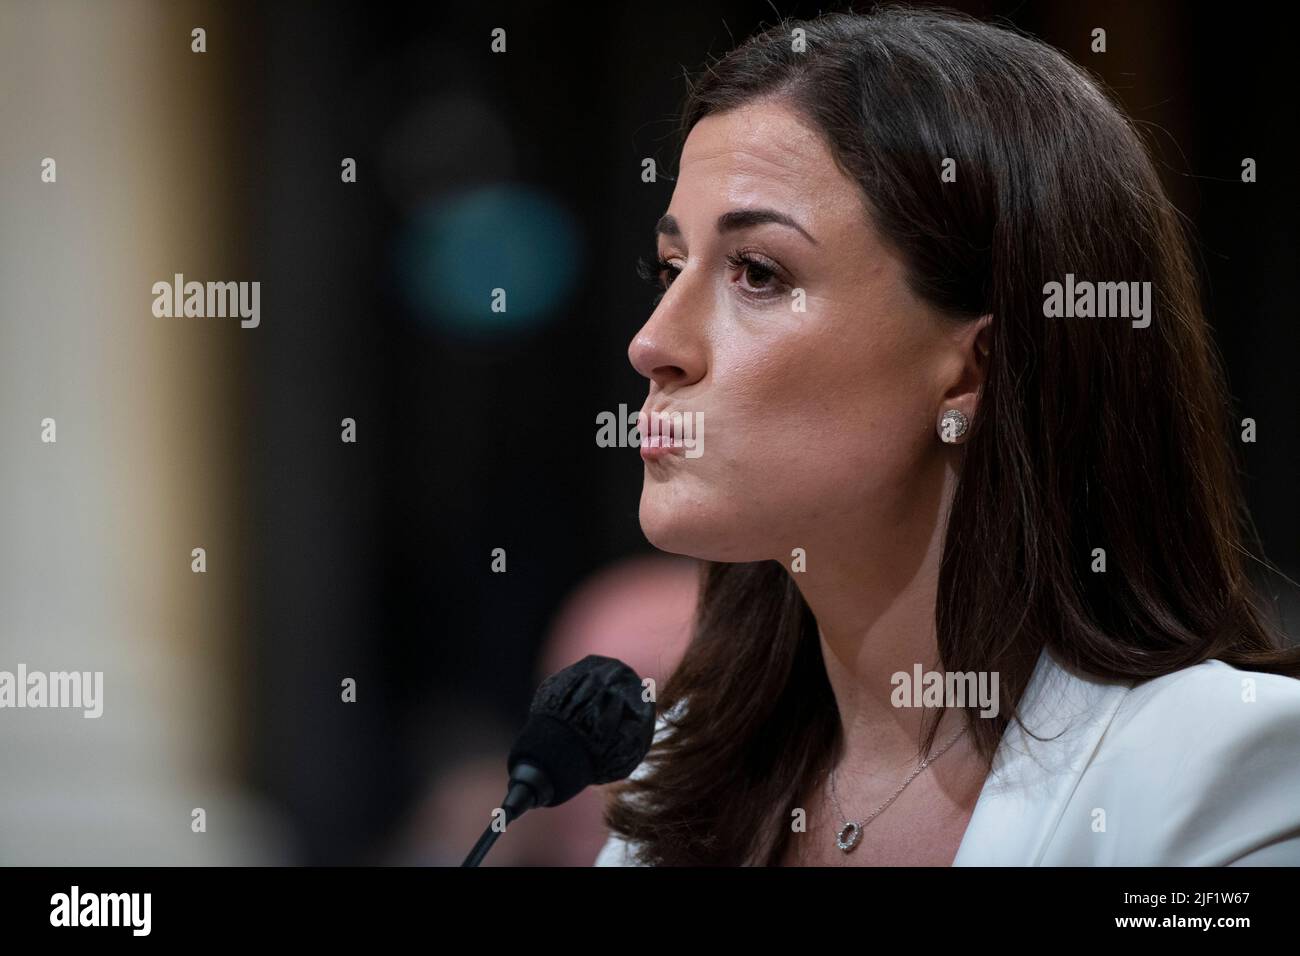 Washington, United States Of America. 28th June, 2022. Cassidy Hutchinson, an aide to former White House Chief of Staff Mark Meadows sits at the witness table on day six of the United States House Select Committee to Investigate the January 6th Attack on the US Capitol hearing on Capitol Hill in Washington, DC on June 28, 2022. Credit: Rod Lamkey/CNP/Sipa USA Credit: Sipa USA/Alamy Live News Stock Photo